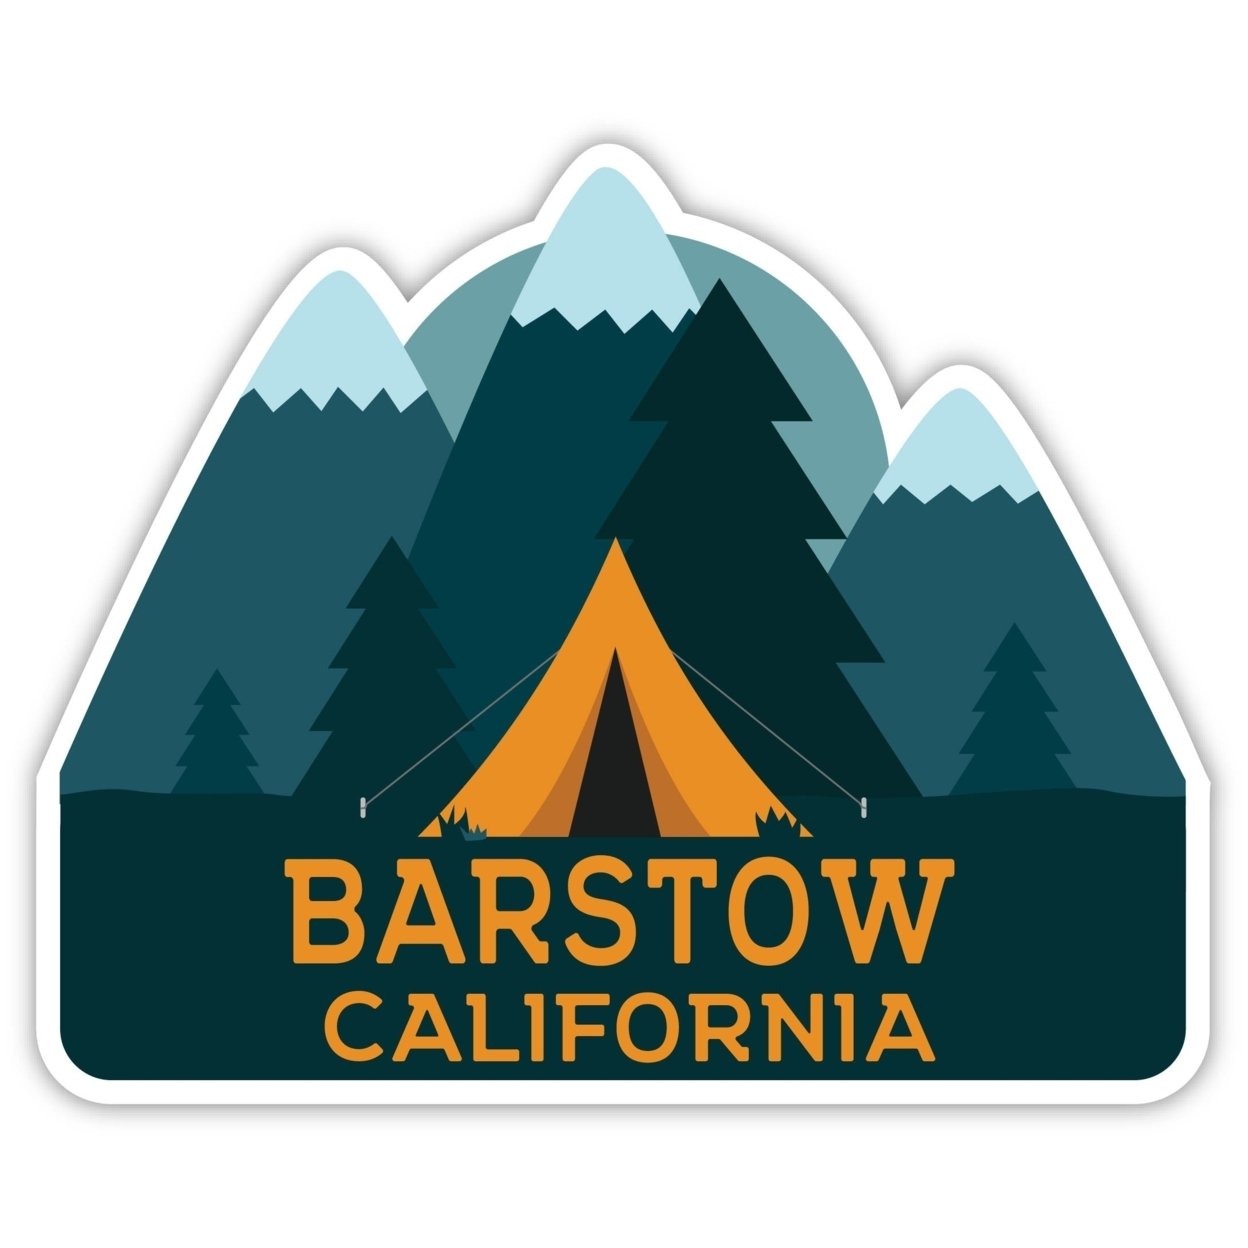 Barstow California Souvenir Decorative Stickers (Choose Theme And Size) - Single Unit, 2-Inch, Camp Life